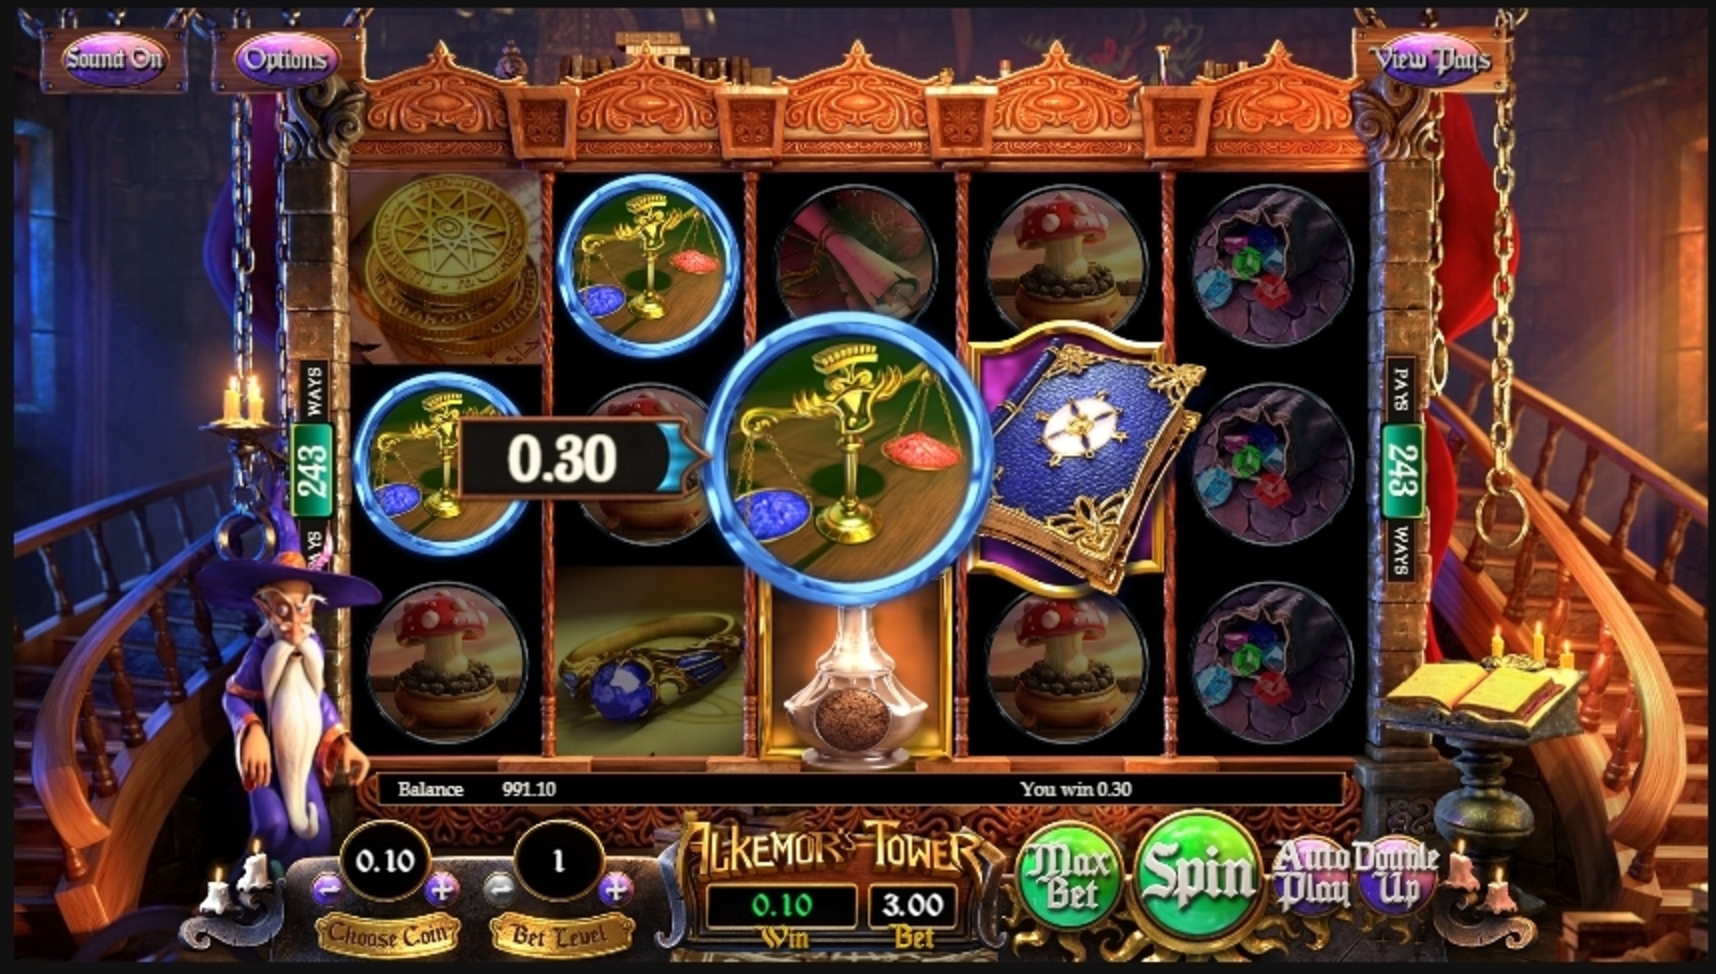 Win Money in Alkemors Tower Free Slot Game by Betsoft